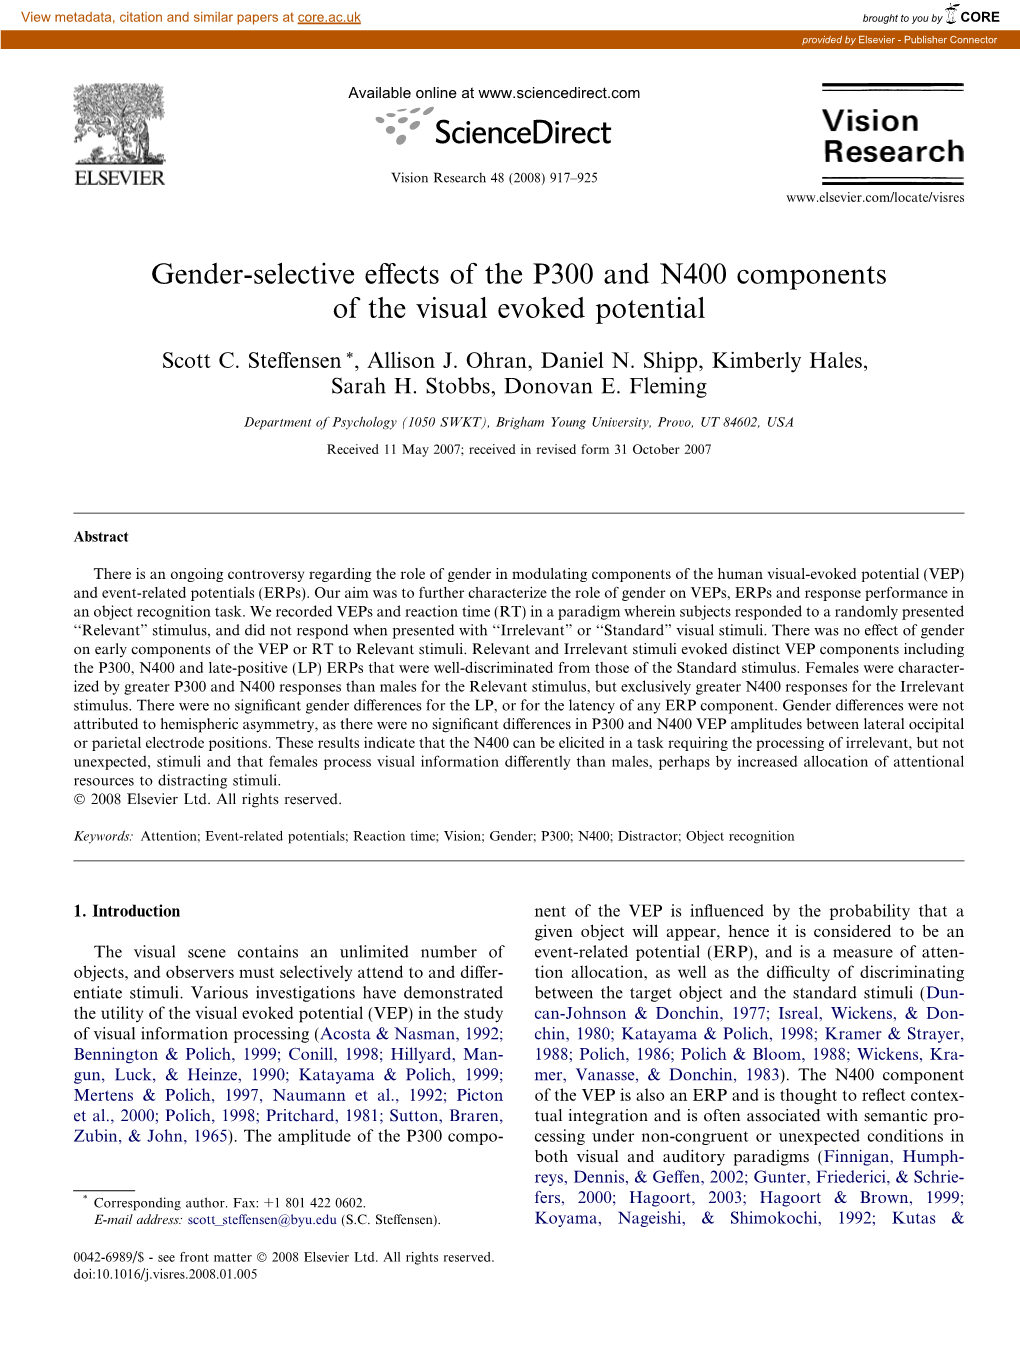 Gender-Selective Effects of the P300 and N400 Components of the Visual